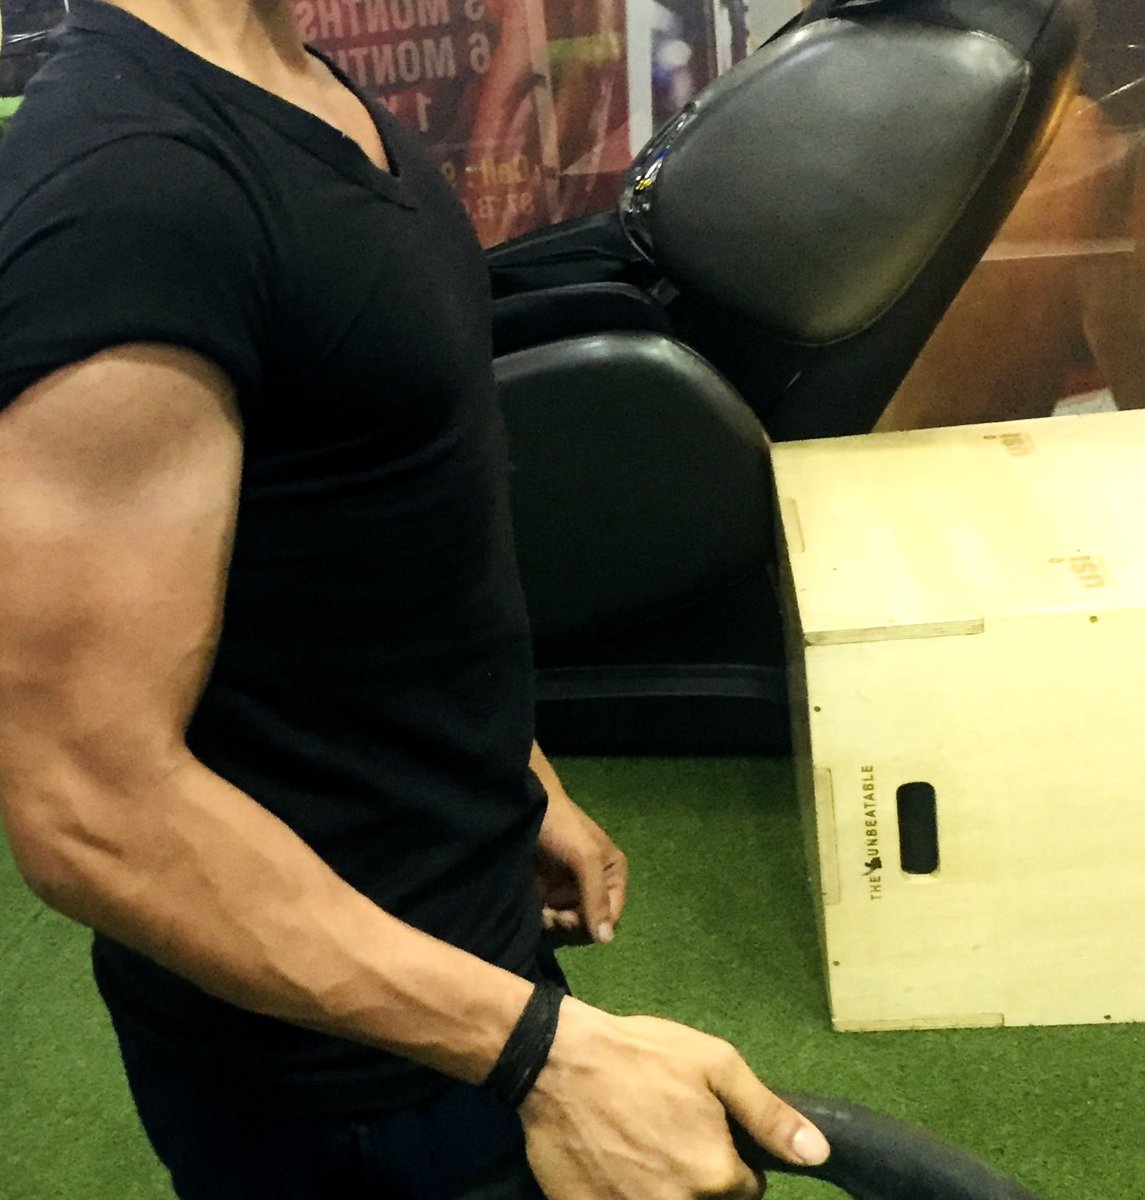 'Flexing my biceps and my determination 💪 #StrengthInProgress
#karandeol #karandeolfans #karandeolfansclub #karandeollovers #imkarandeol #mkarandeol #karandeol
#fitness #karandeolfitness #gym